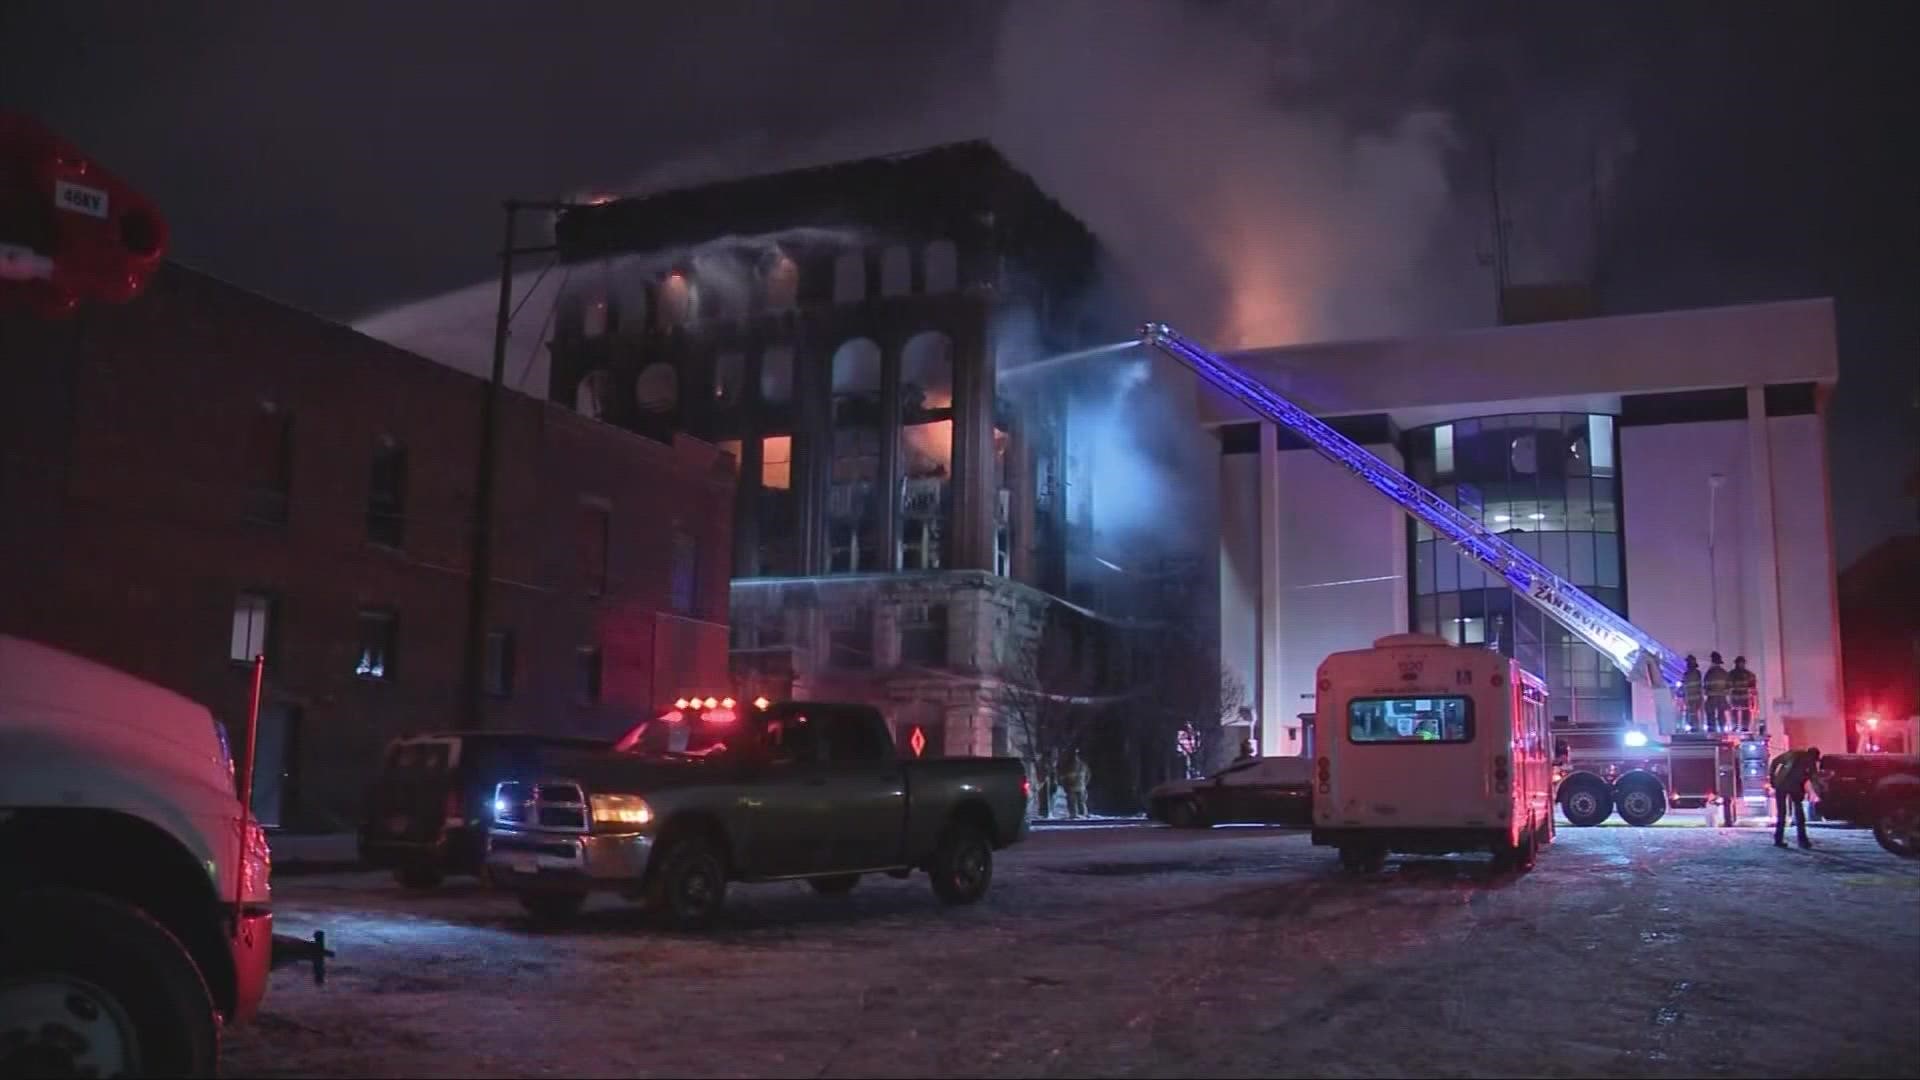 The fire happened back on Jan. 6. The building was about 120 years old.